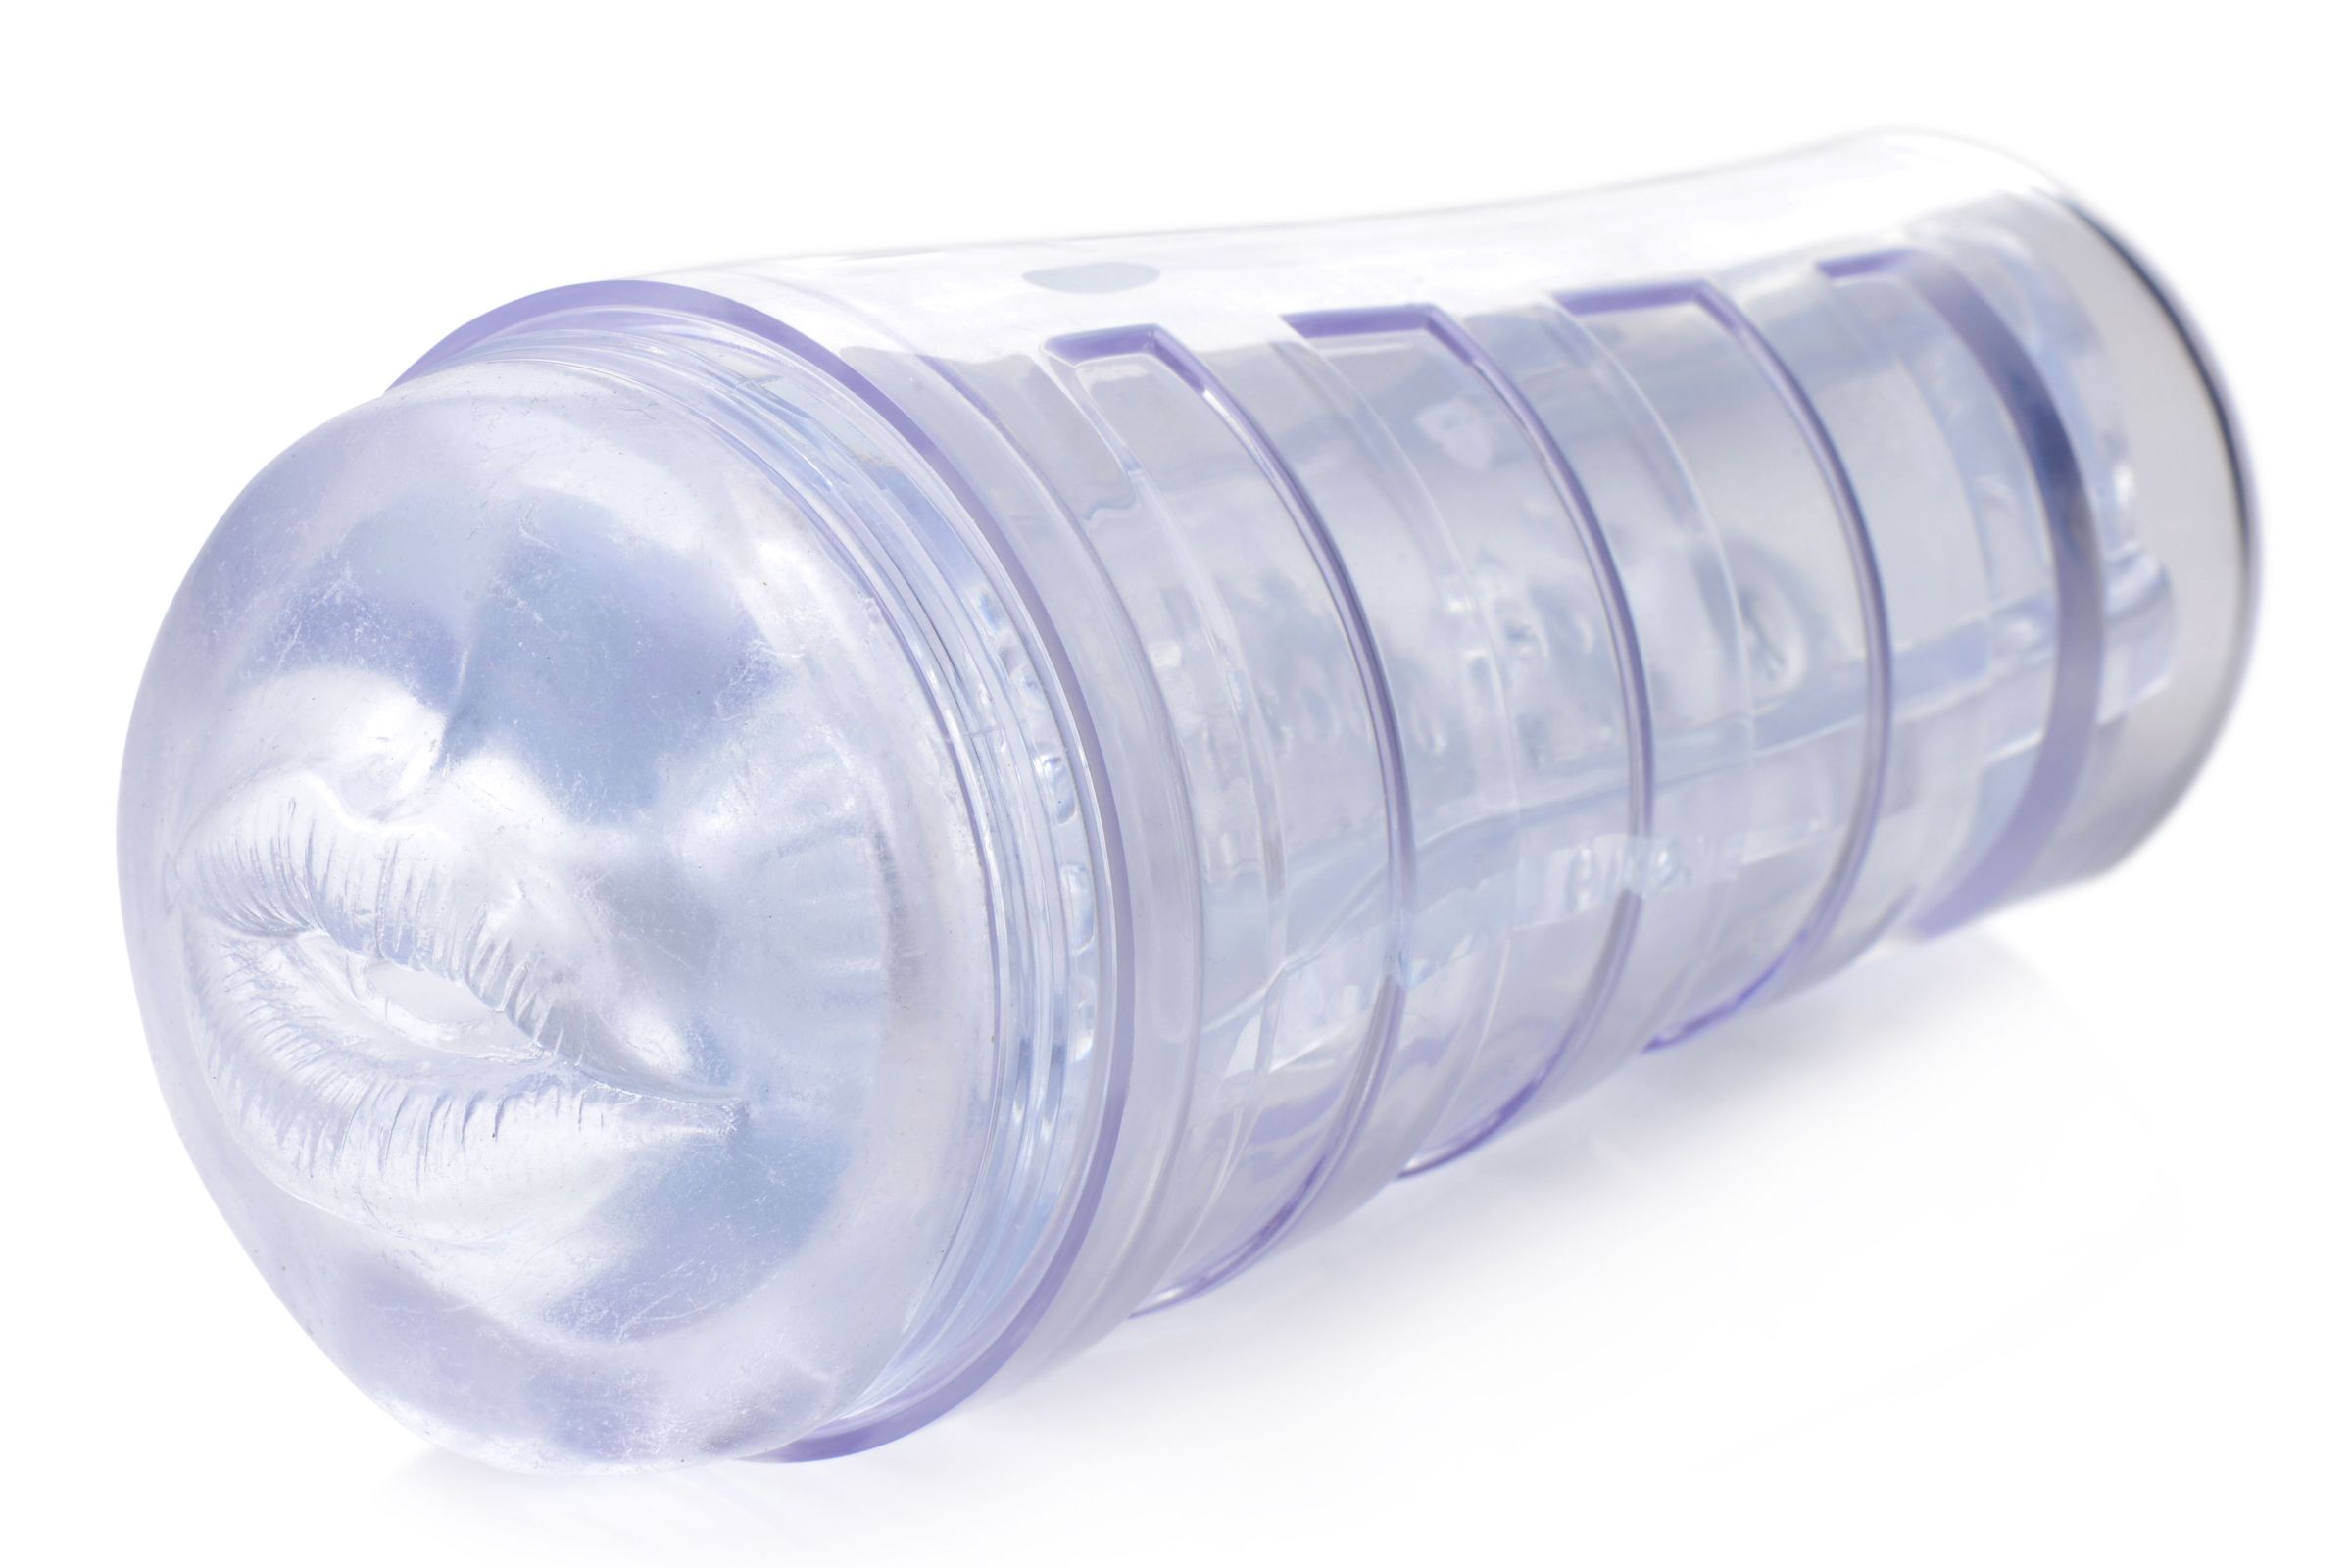 Mistress Courtney Diamond Deluxe Mouth Stroker – Clear